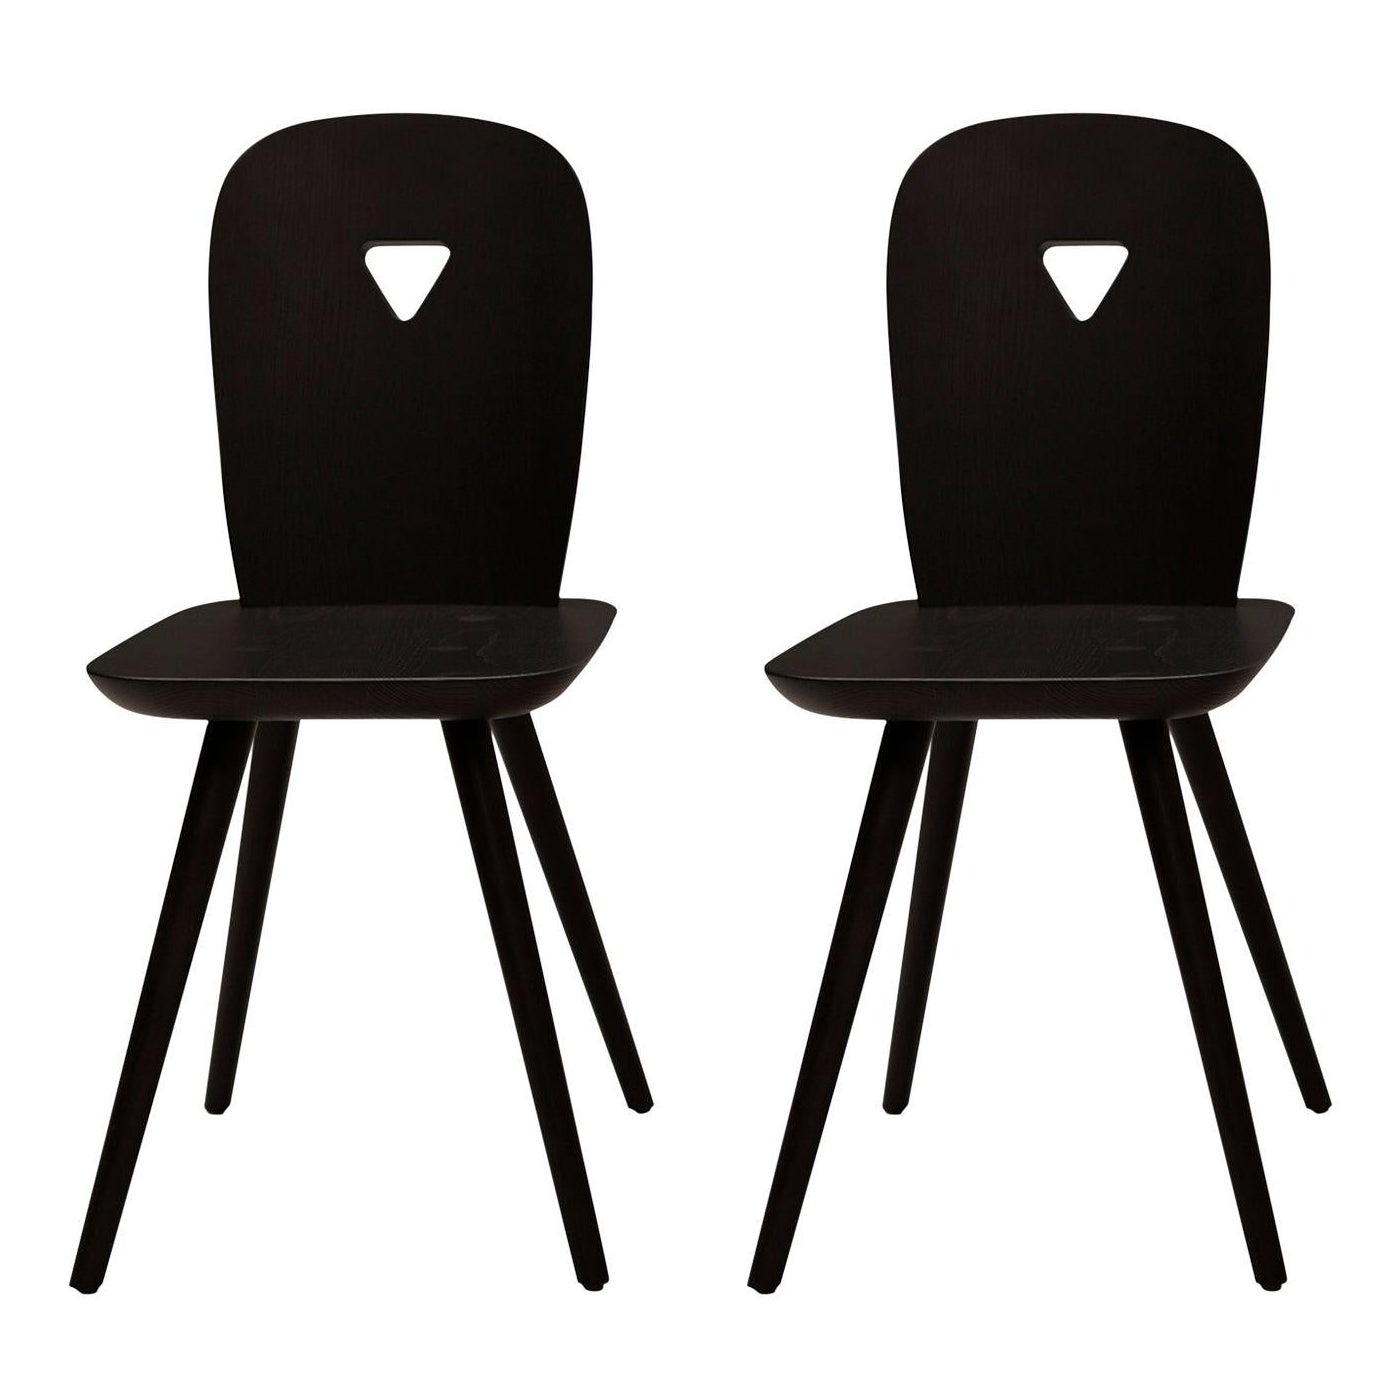 La-Dina Set of 2 Black Chairs by Luca Nichetto For Sale